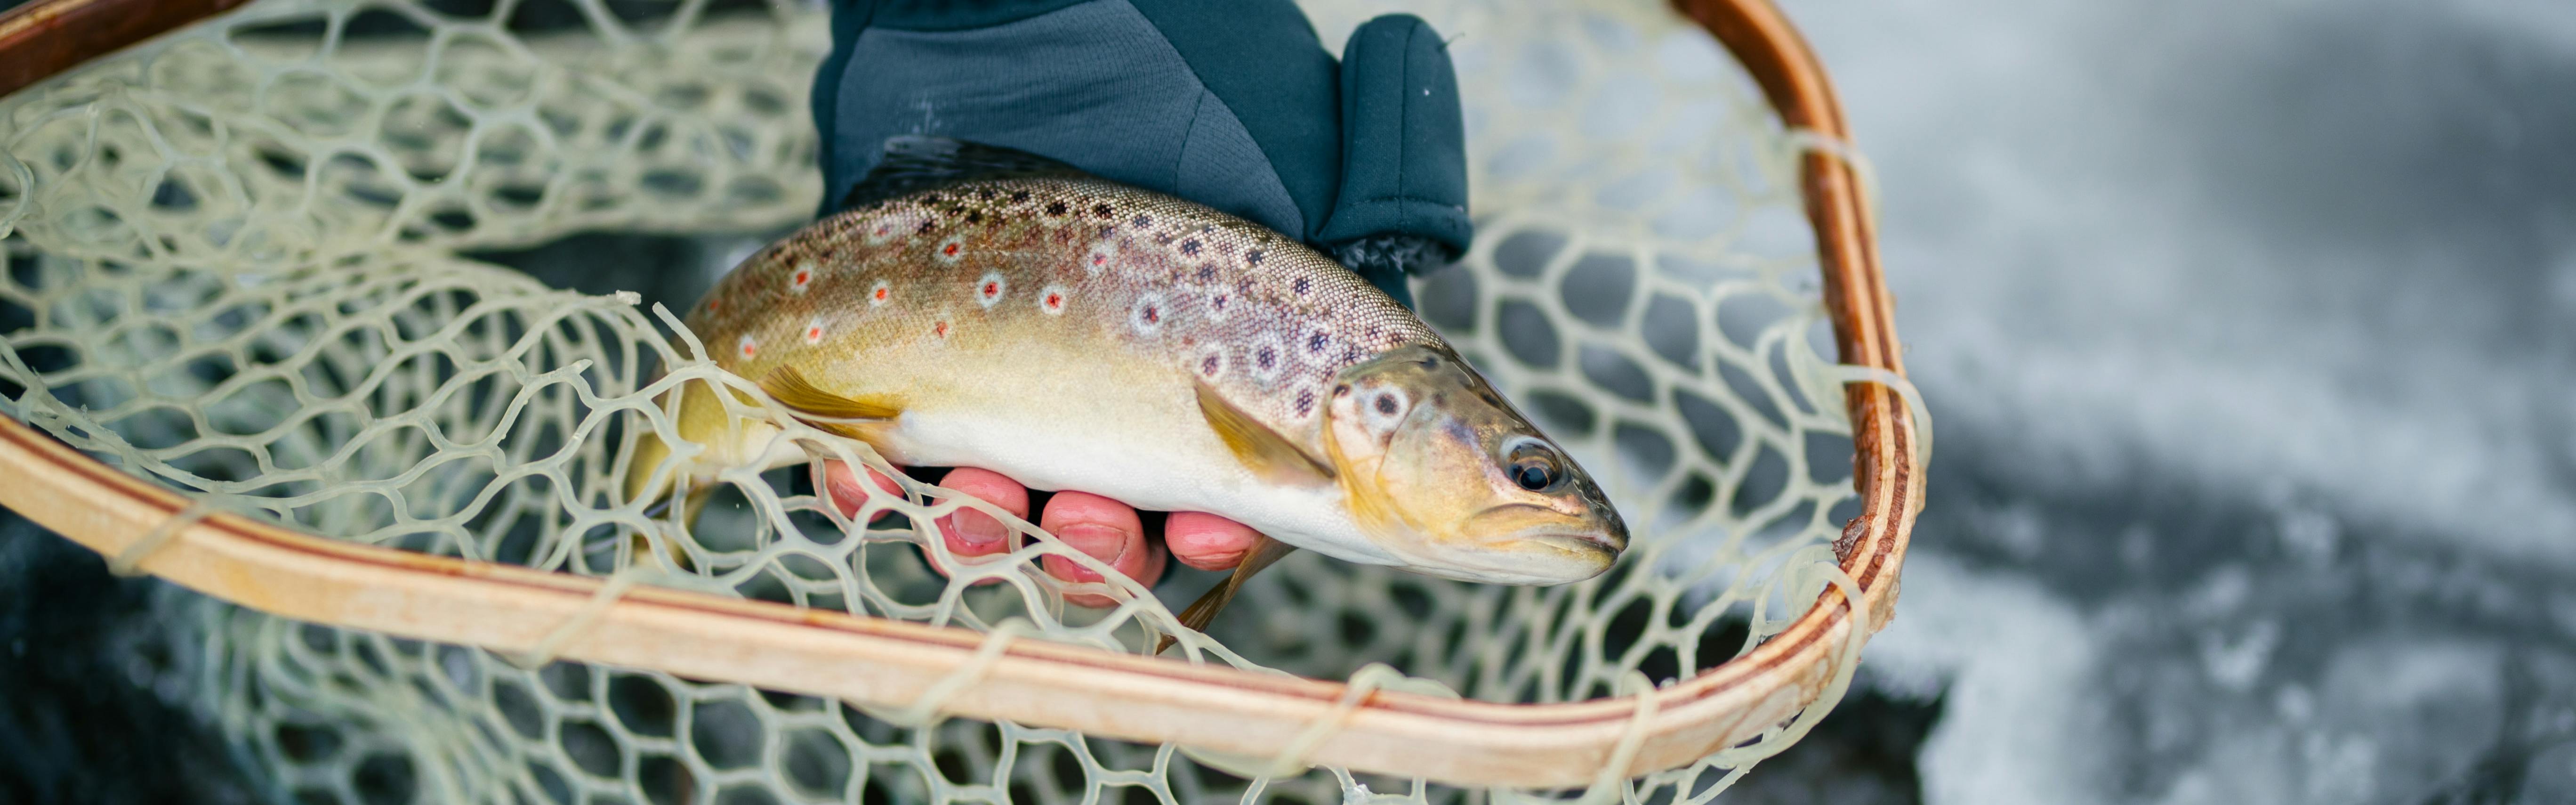 What to Wear Fly Fishing: Tips for Selecting the Perfect Pants, Clothing,  and More